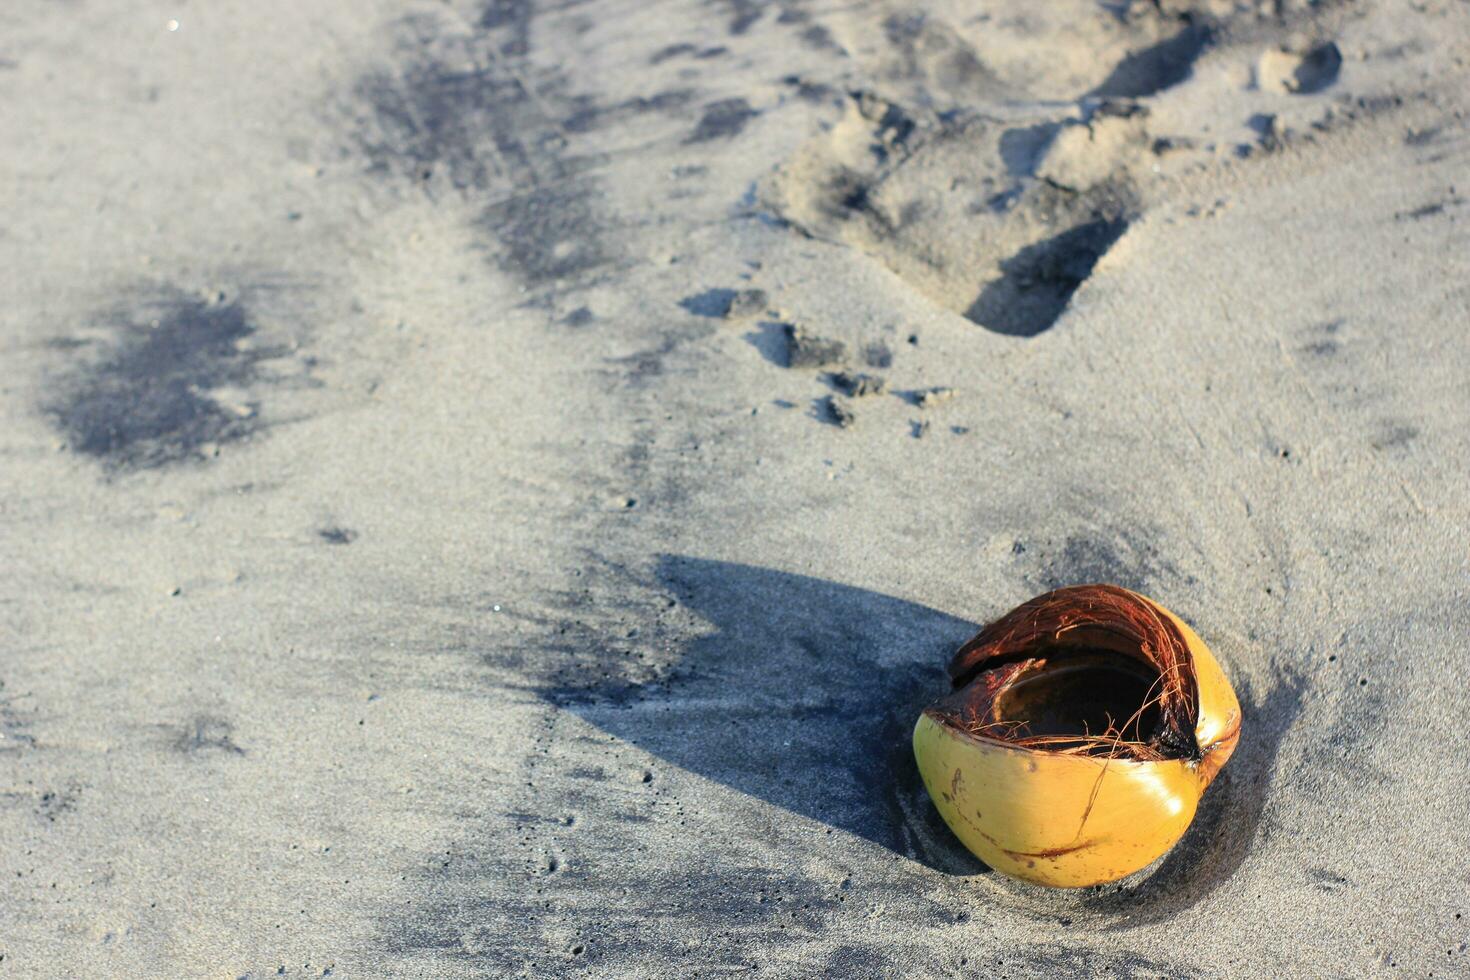 Coconut shells that have been opened lying on the beach sand photo